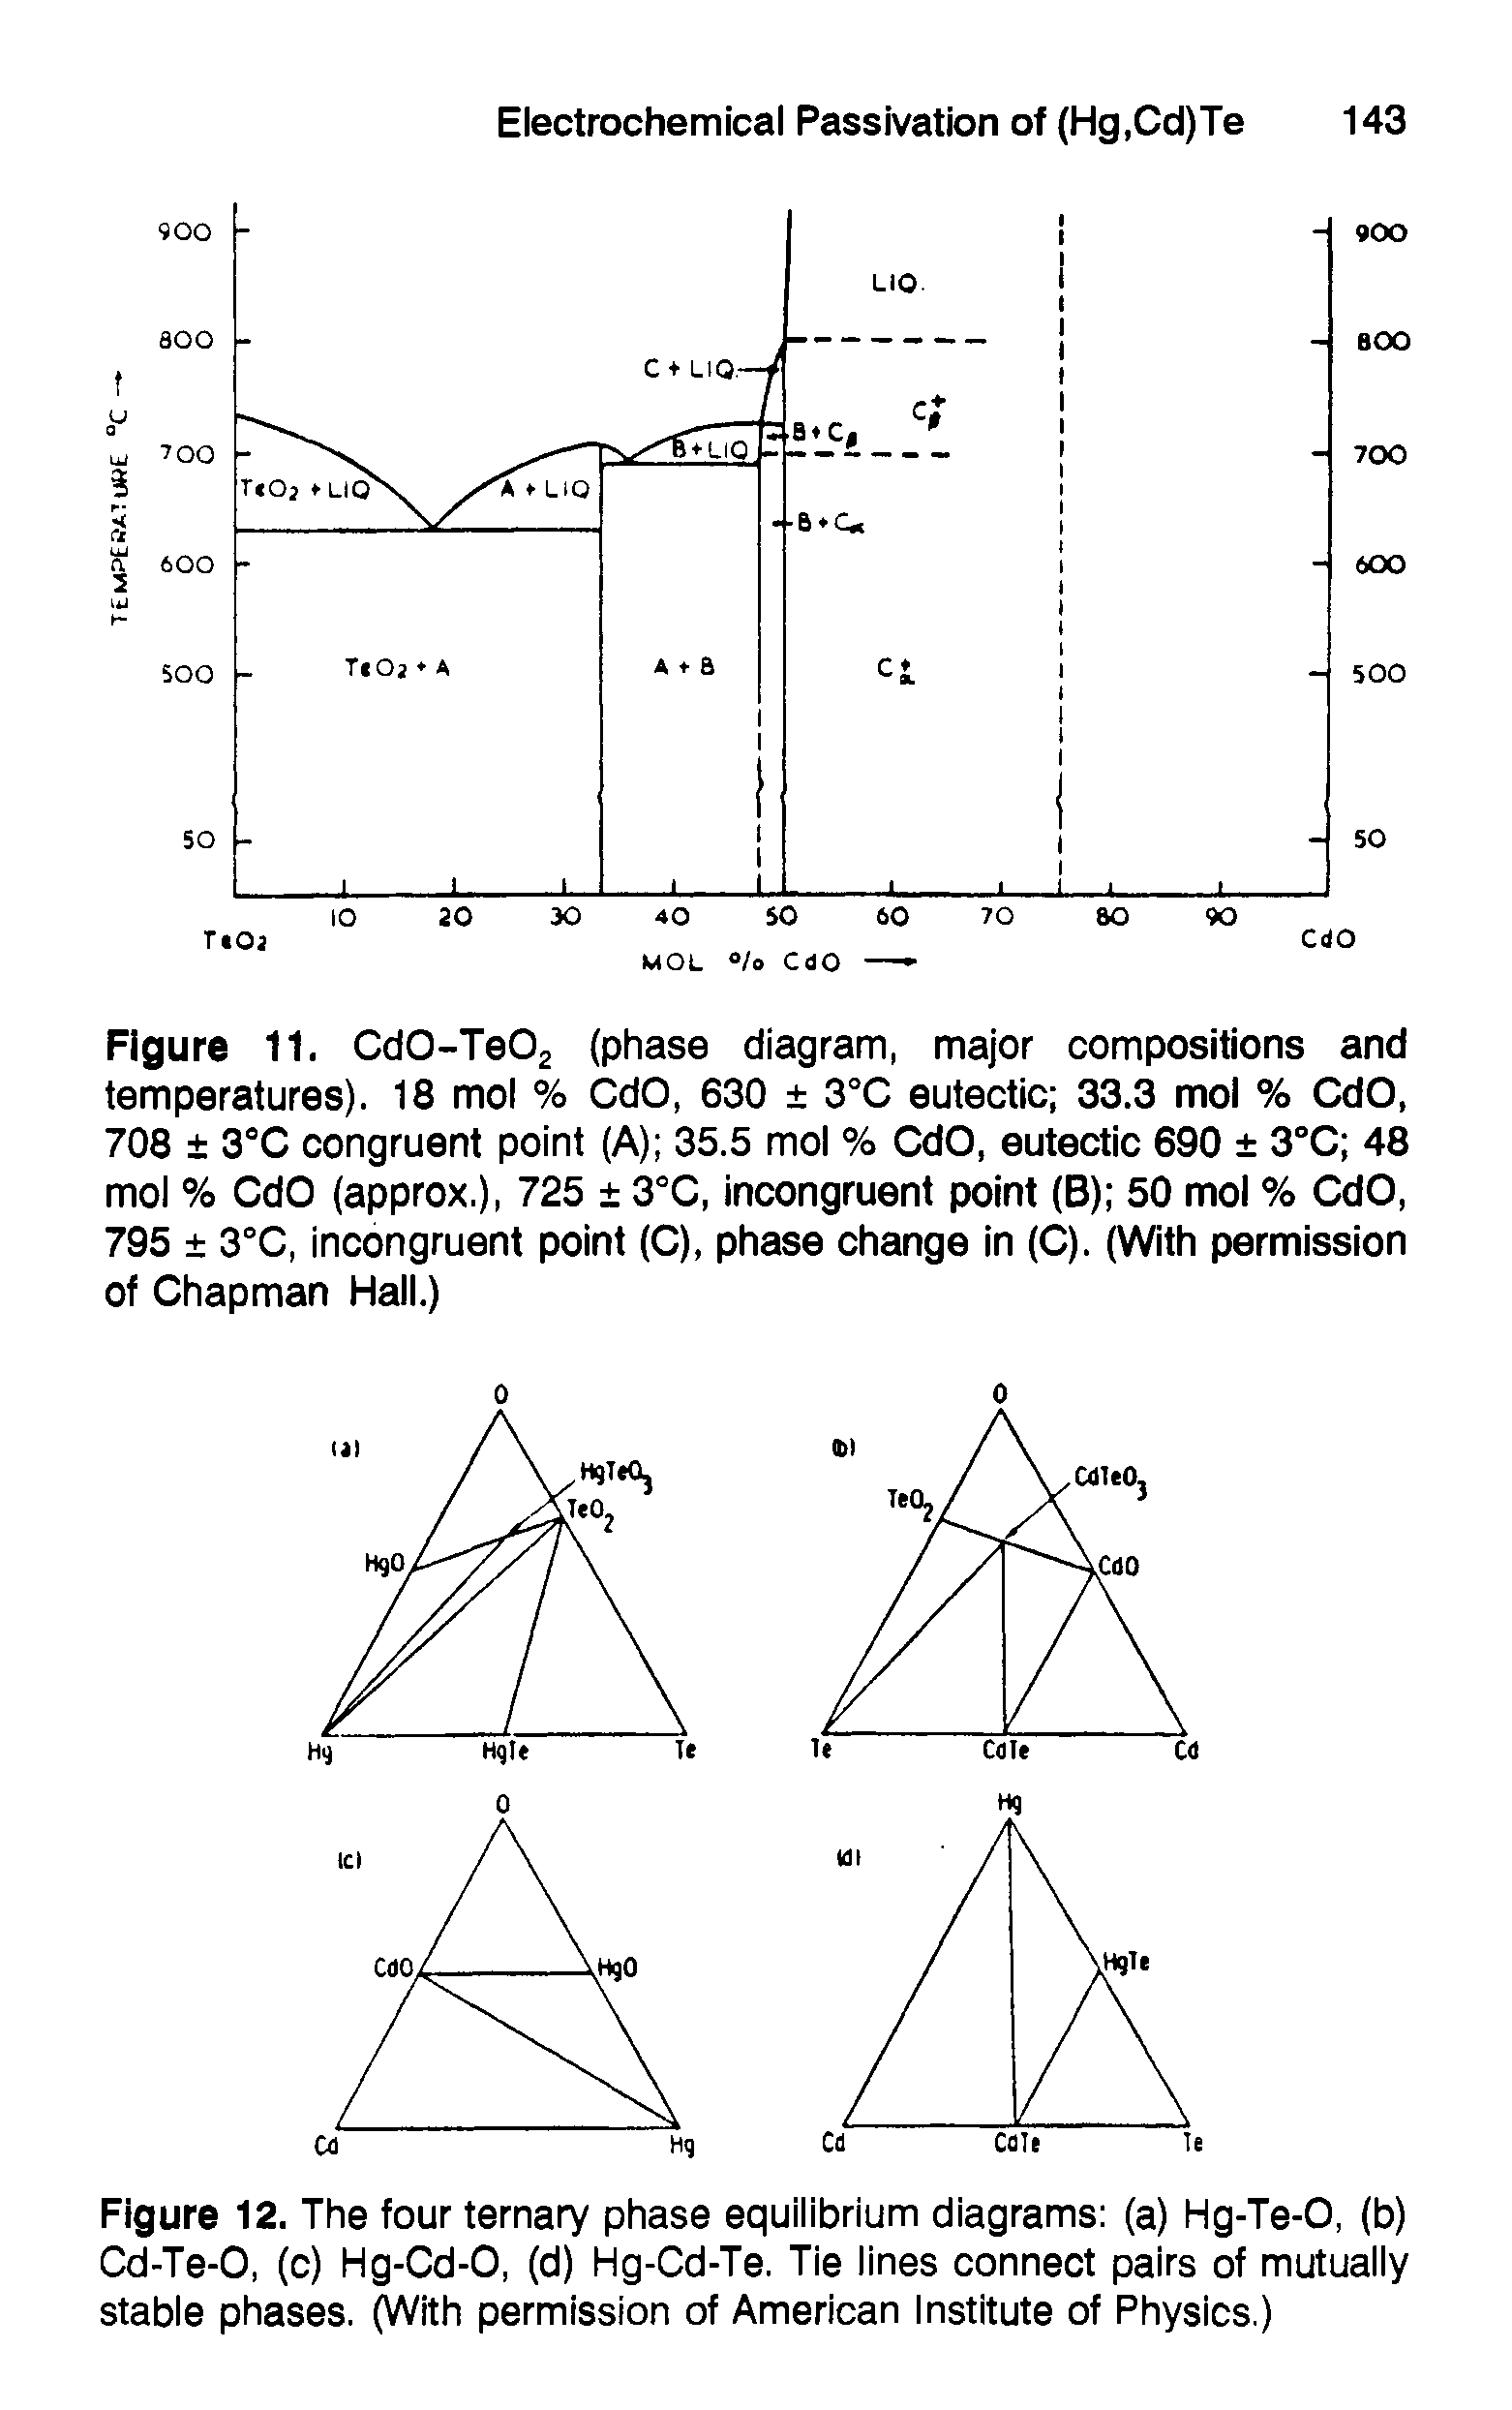 Figure 12. The four ternary phase equilibrium diagrams (a) Hg-Te-0, (b) Cd-Te-0, (c) Hg-Cd-0, (d) Hg-Cd-Te. Tie lines connect pairs of mutually stable phases. (With permission of American Institute of Physics.)...